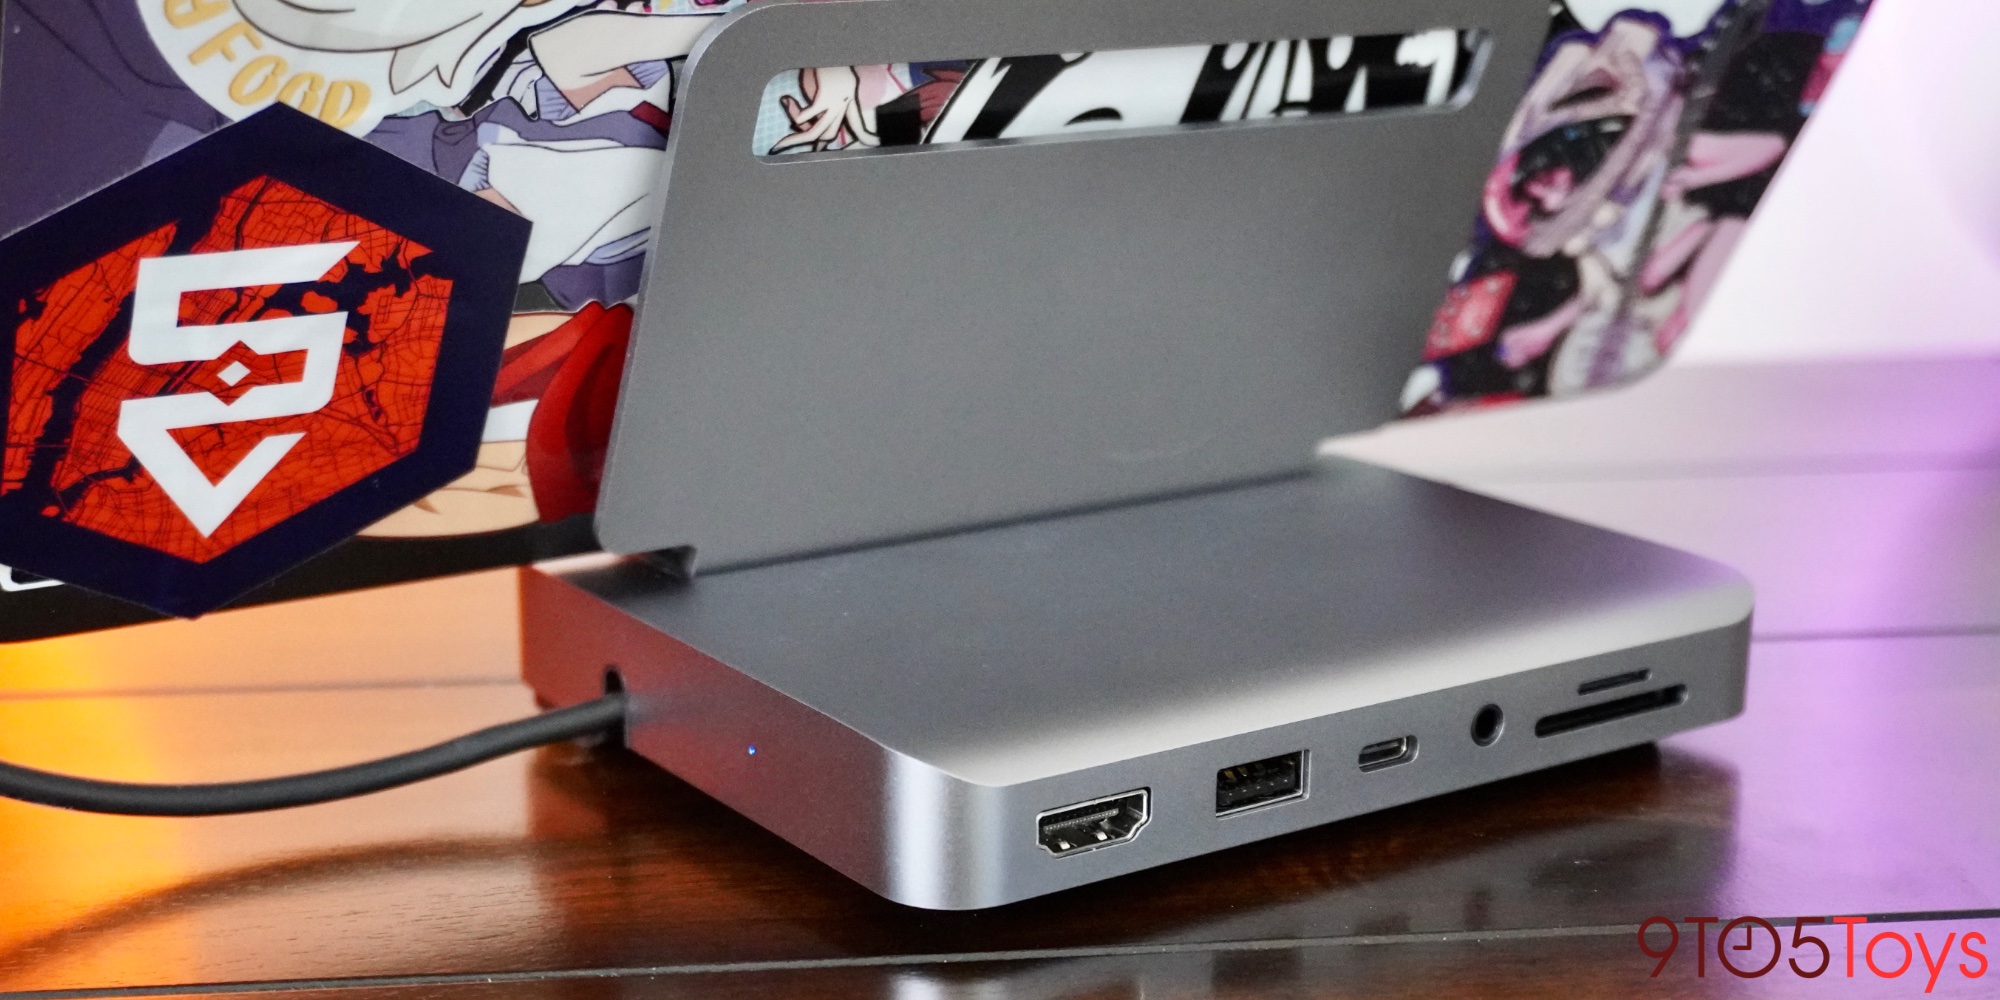 Hands-on with Satechi’s new folding Stand and Hub iPad Pro/Air 6-in-1 USB-C dock